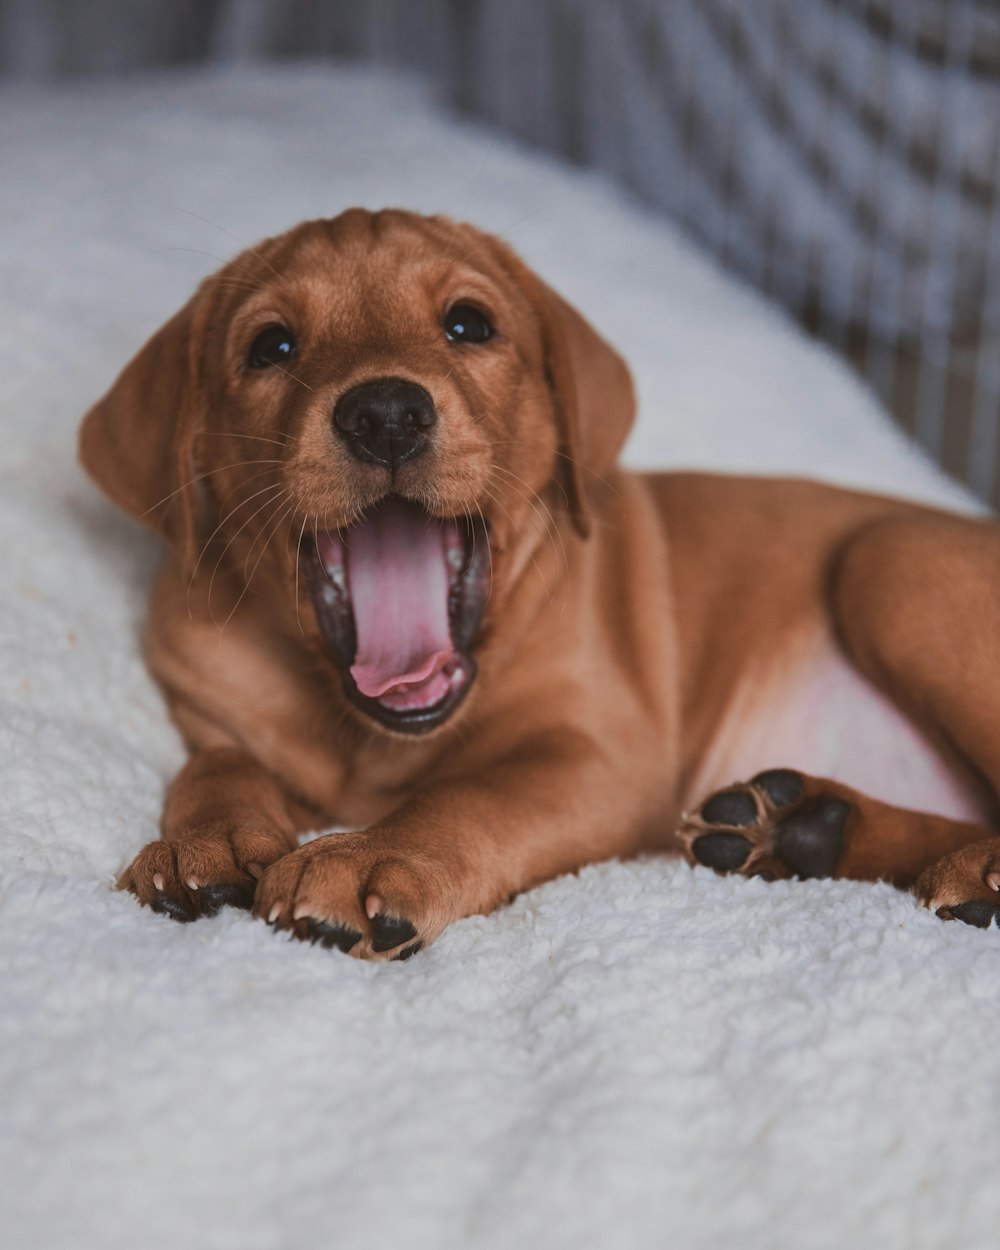 brown short coated puppy lying on white textile